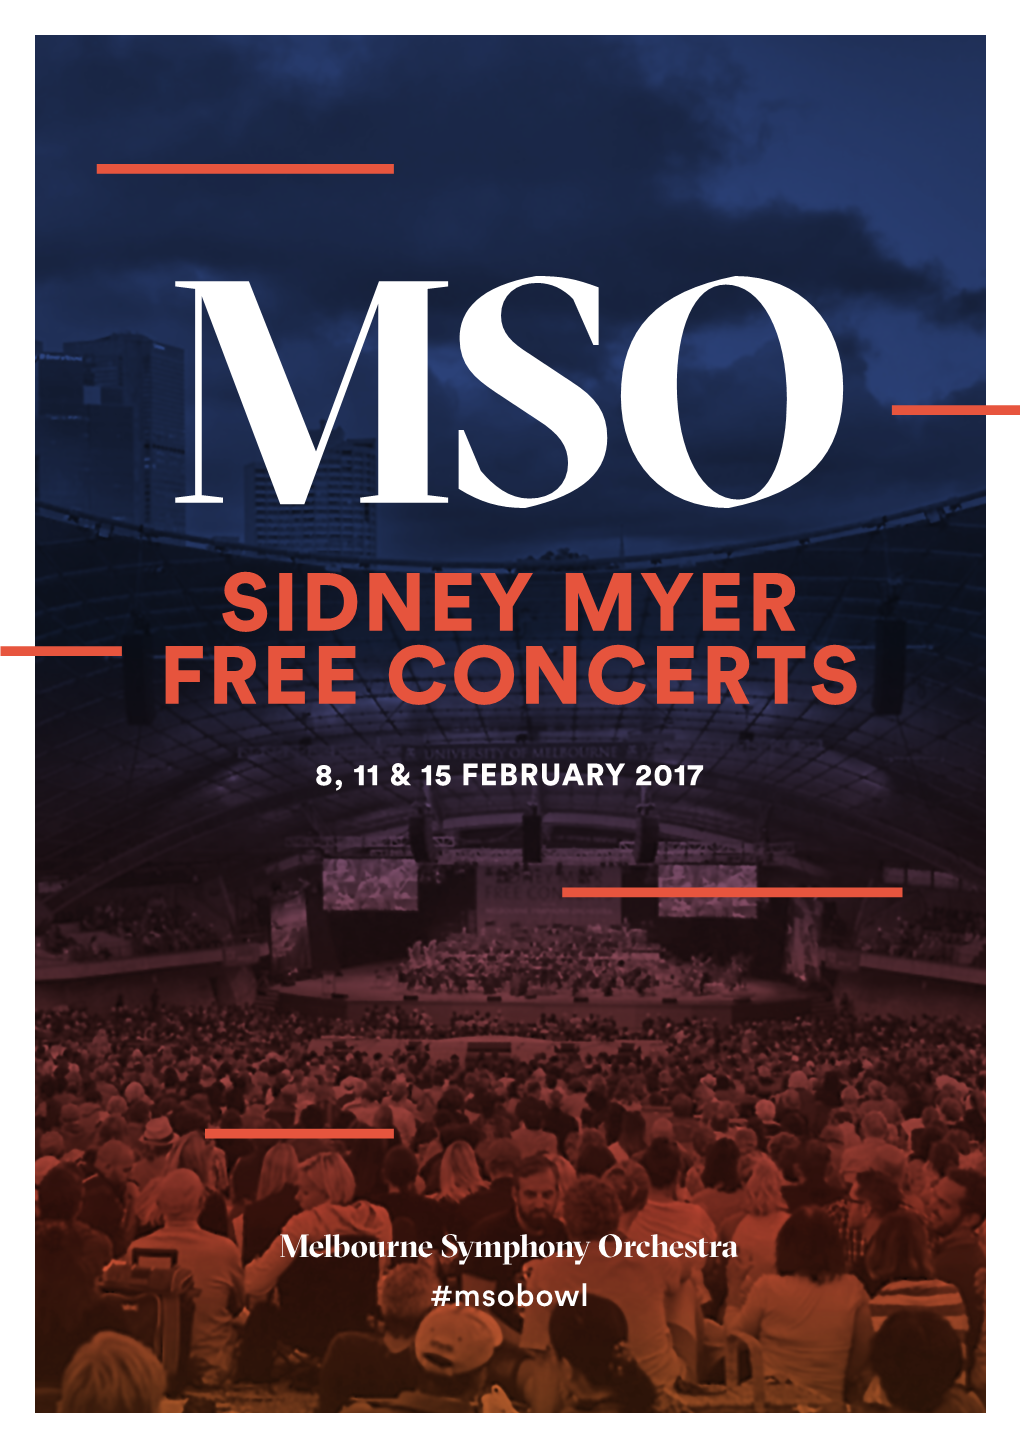 Sidney Myer Free Concerts